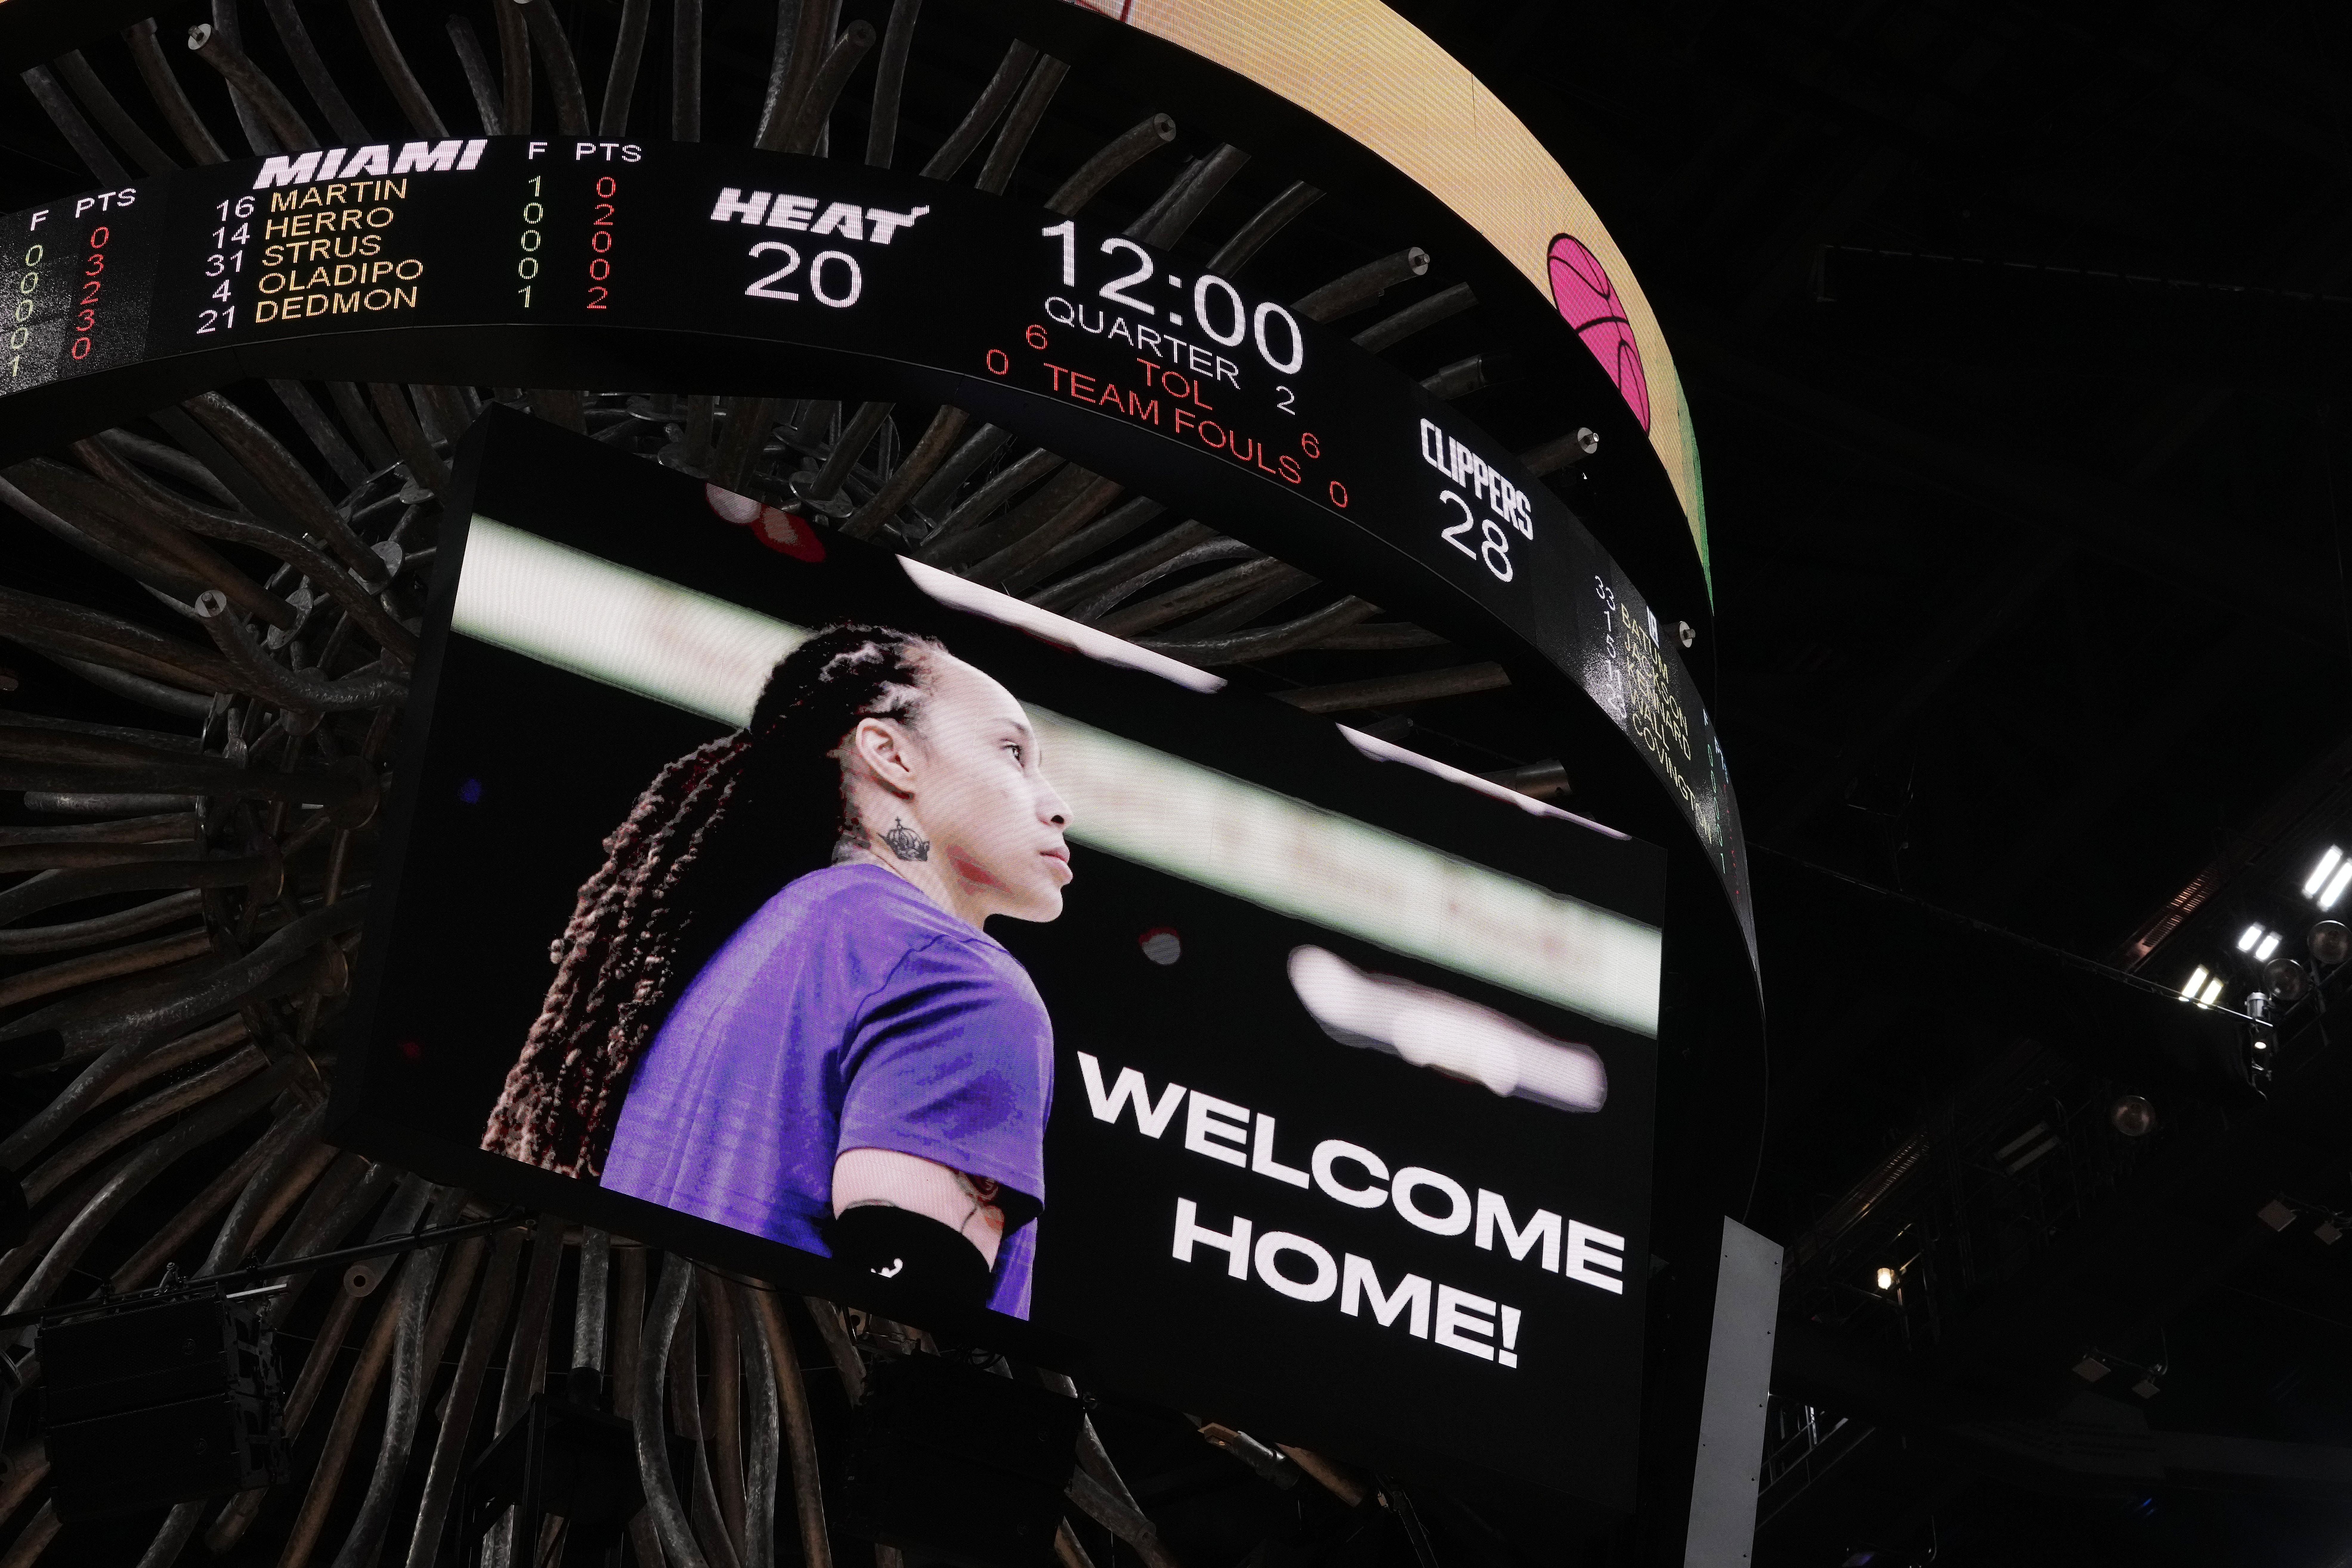 Brittney Griner is welcomed home on the Jumbotron of last night's NBA Heat-Clippers game in Miami.